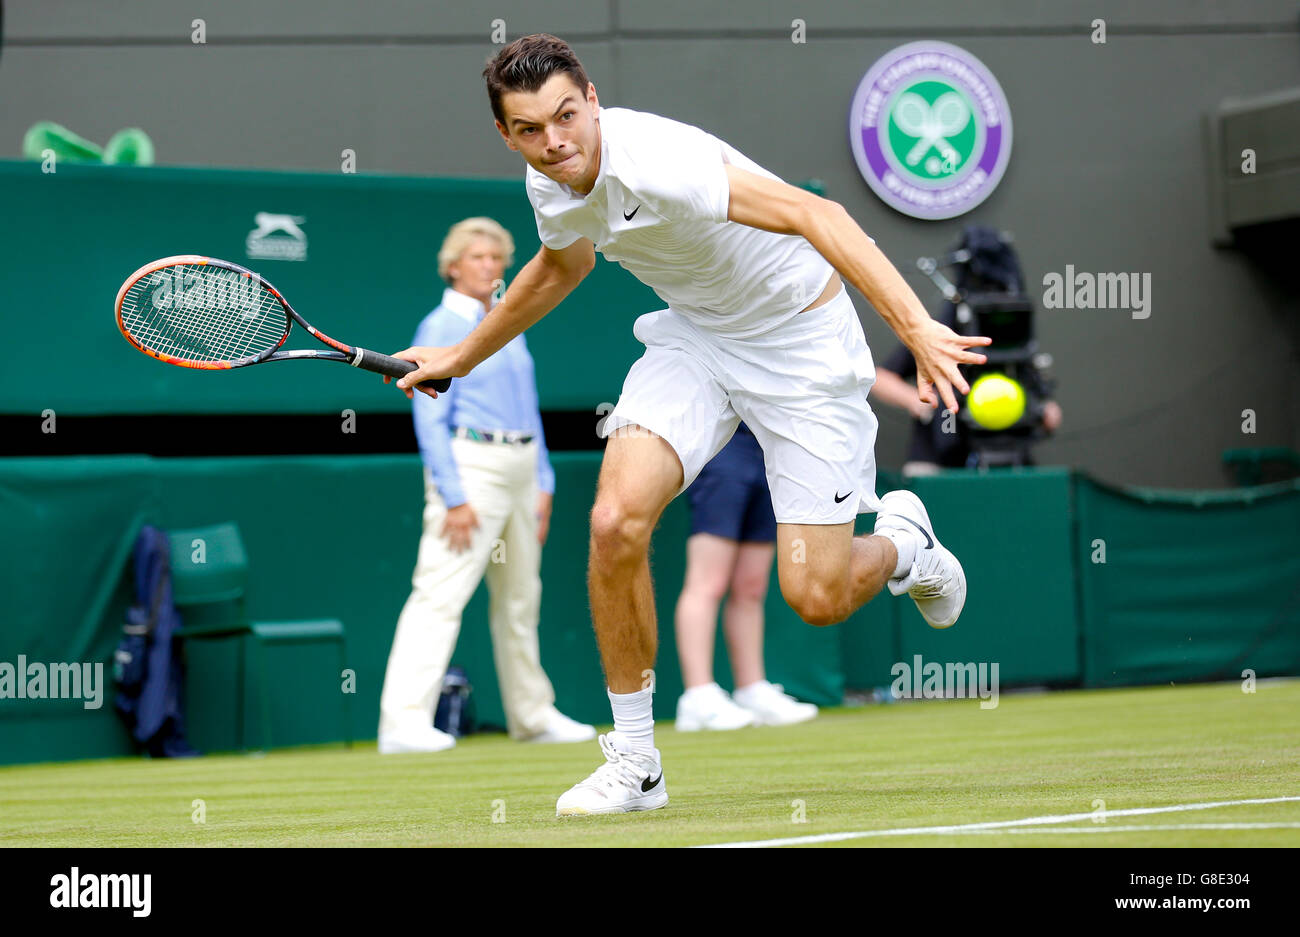 London, UK. 28th June, 2016. Taylor Fritz of the United States returns the ball during the men's singles first round match against Stan Wawrinka of Switzerland on Day 2 of the 2016 Wimbledon Tennis Championships in London, on June 28, 2016. Taylor Fritz lost 1-3. © Ye Pingfan/Xinhua/Alamy Live News Stock Photo